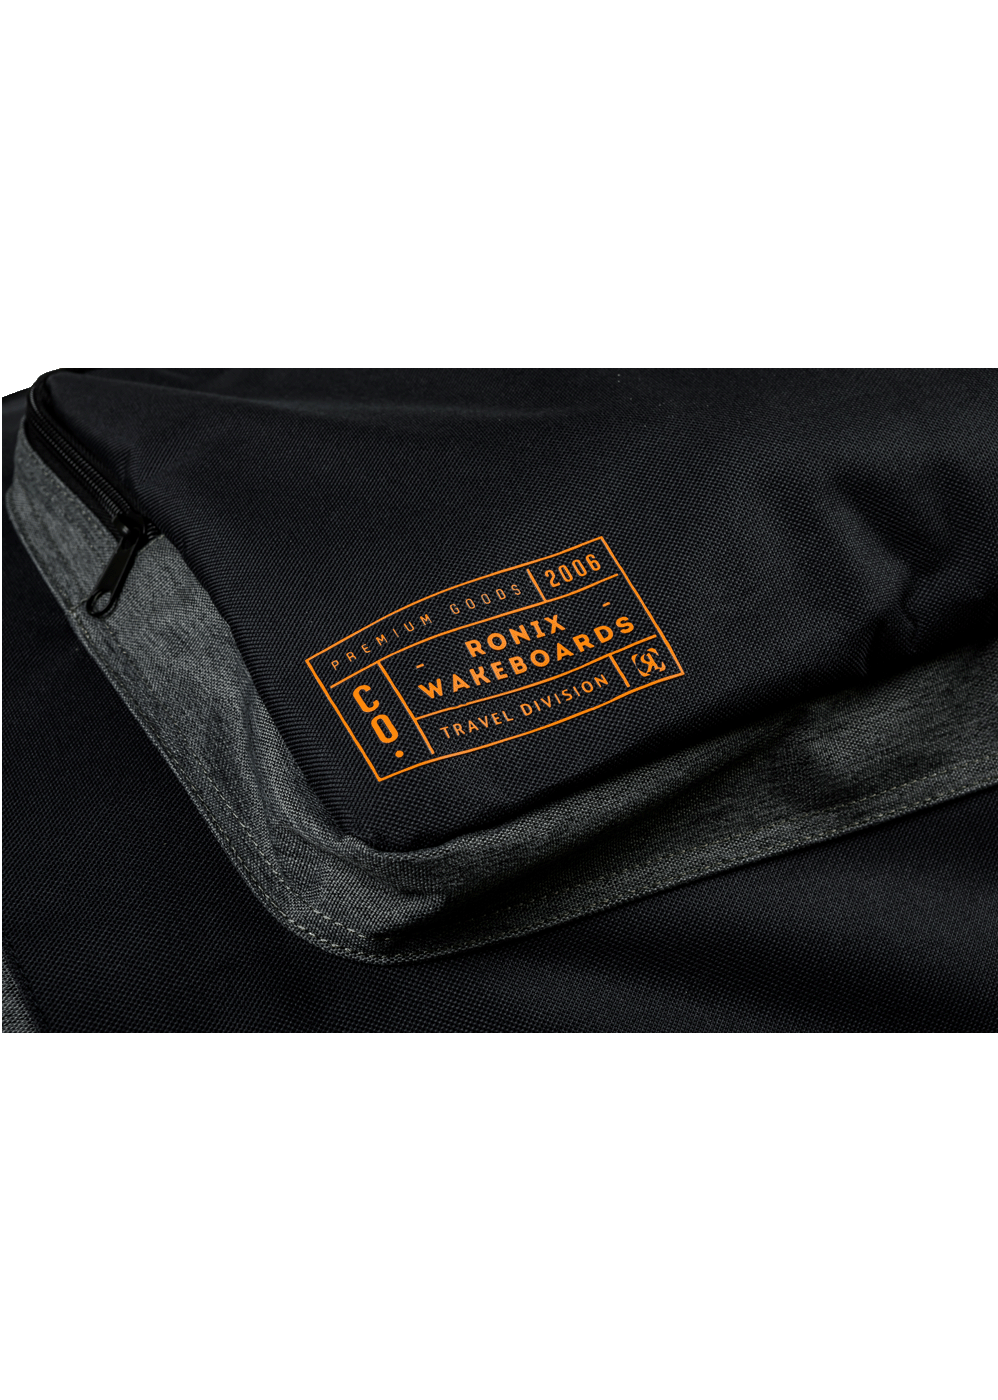 2022 RonixBags Battalion Padded Board Case Inset 2 copy